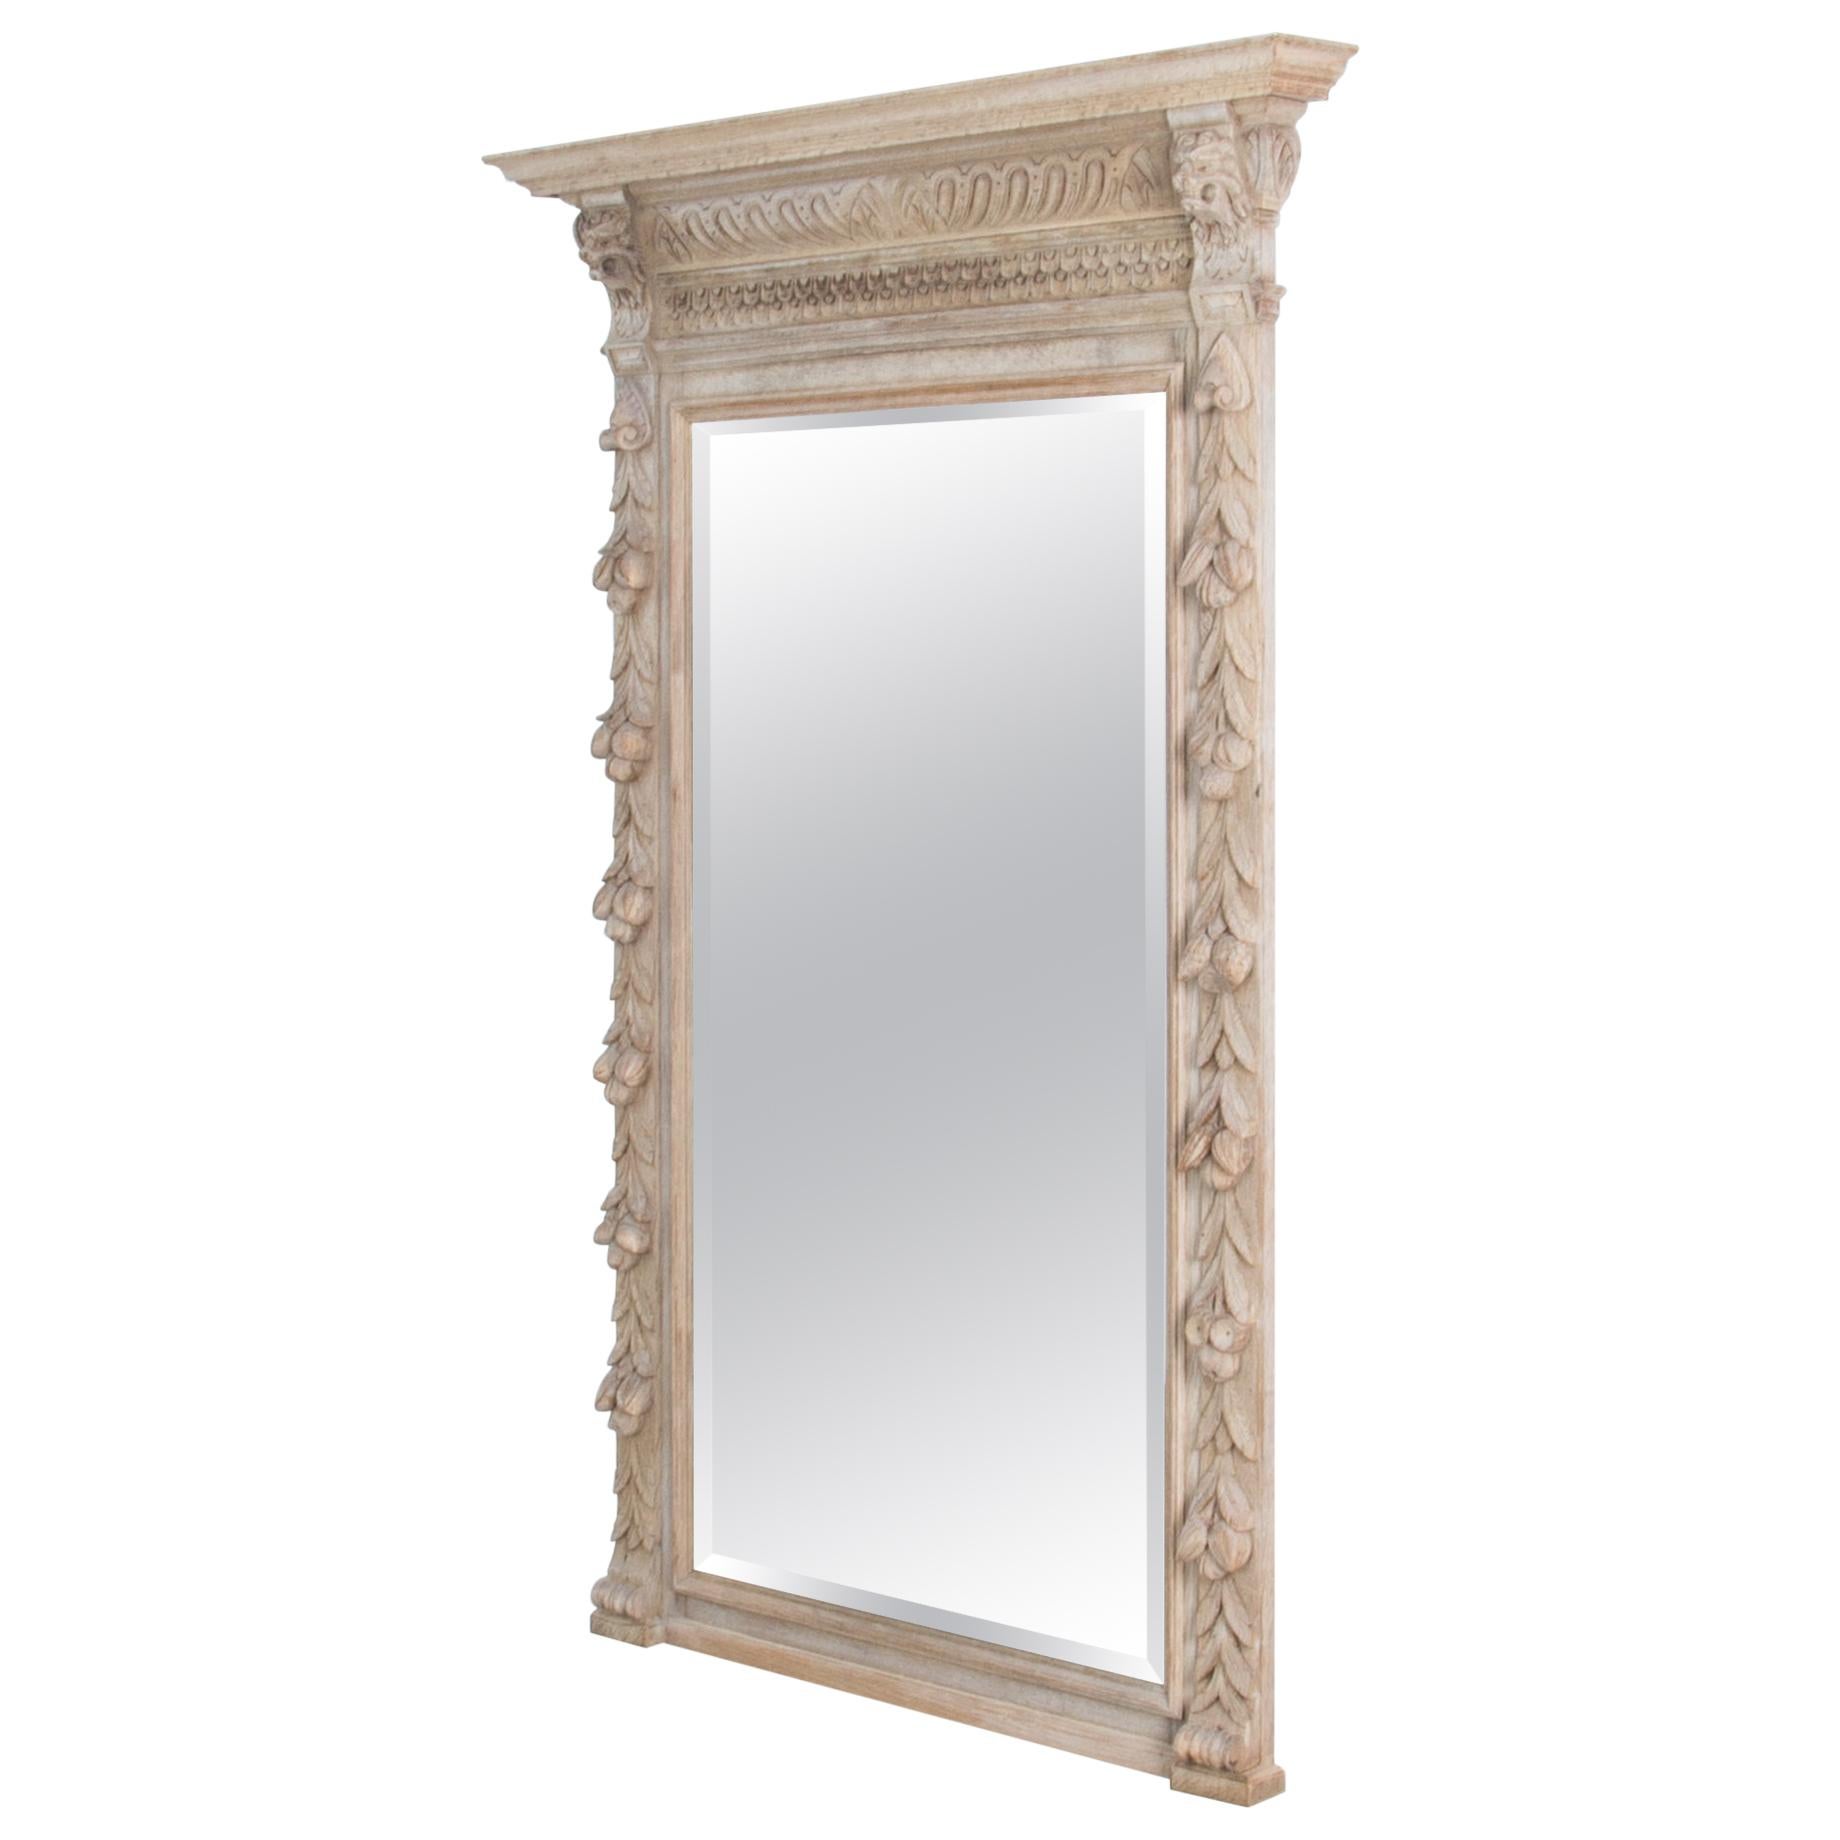 Antique Wall Mirror with Carved Wooden Frame